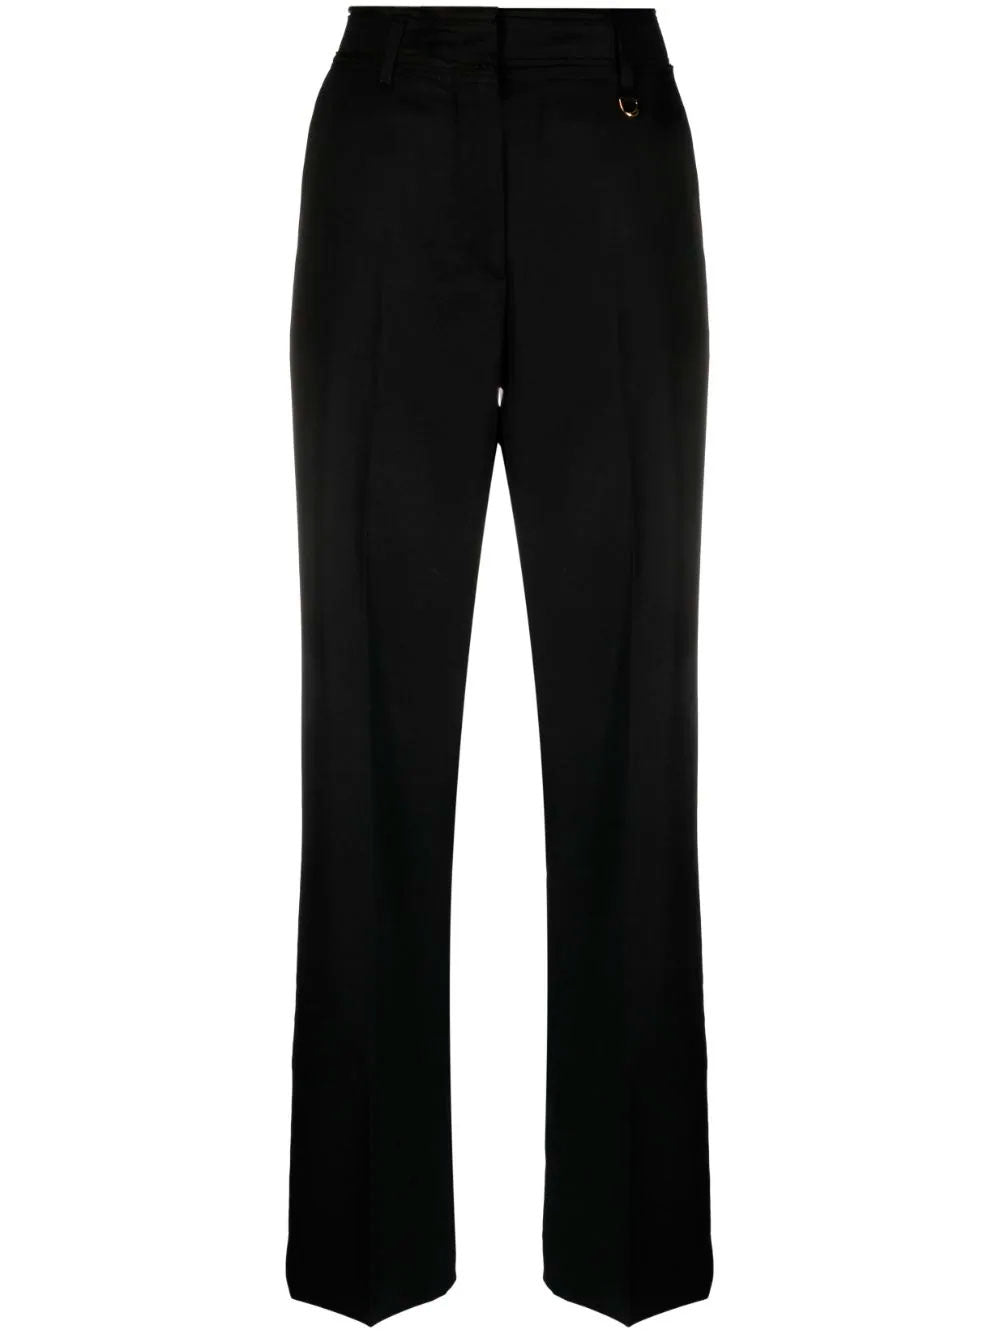 Ficelle trousers